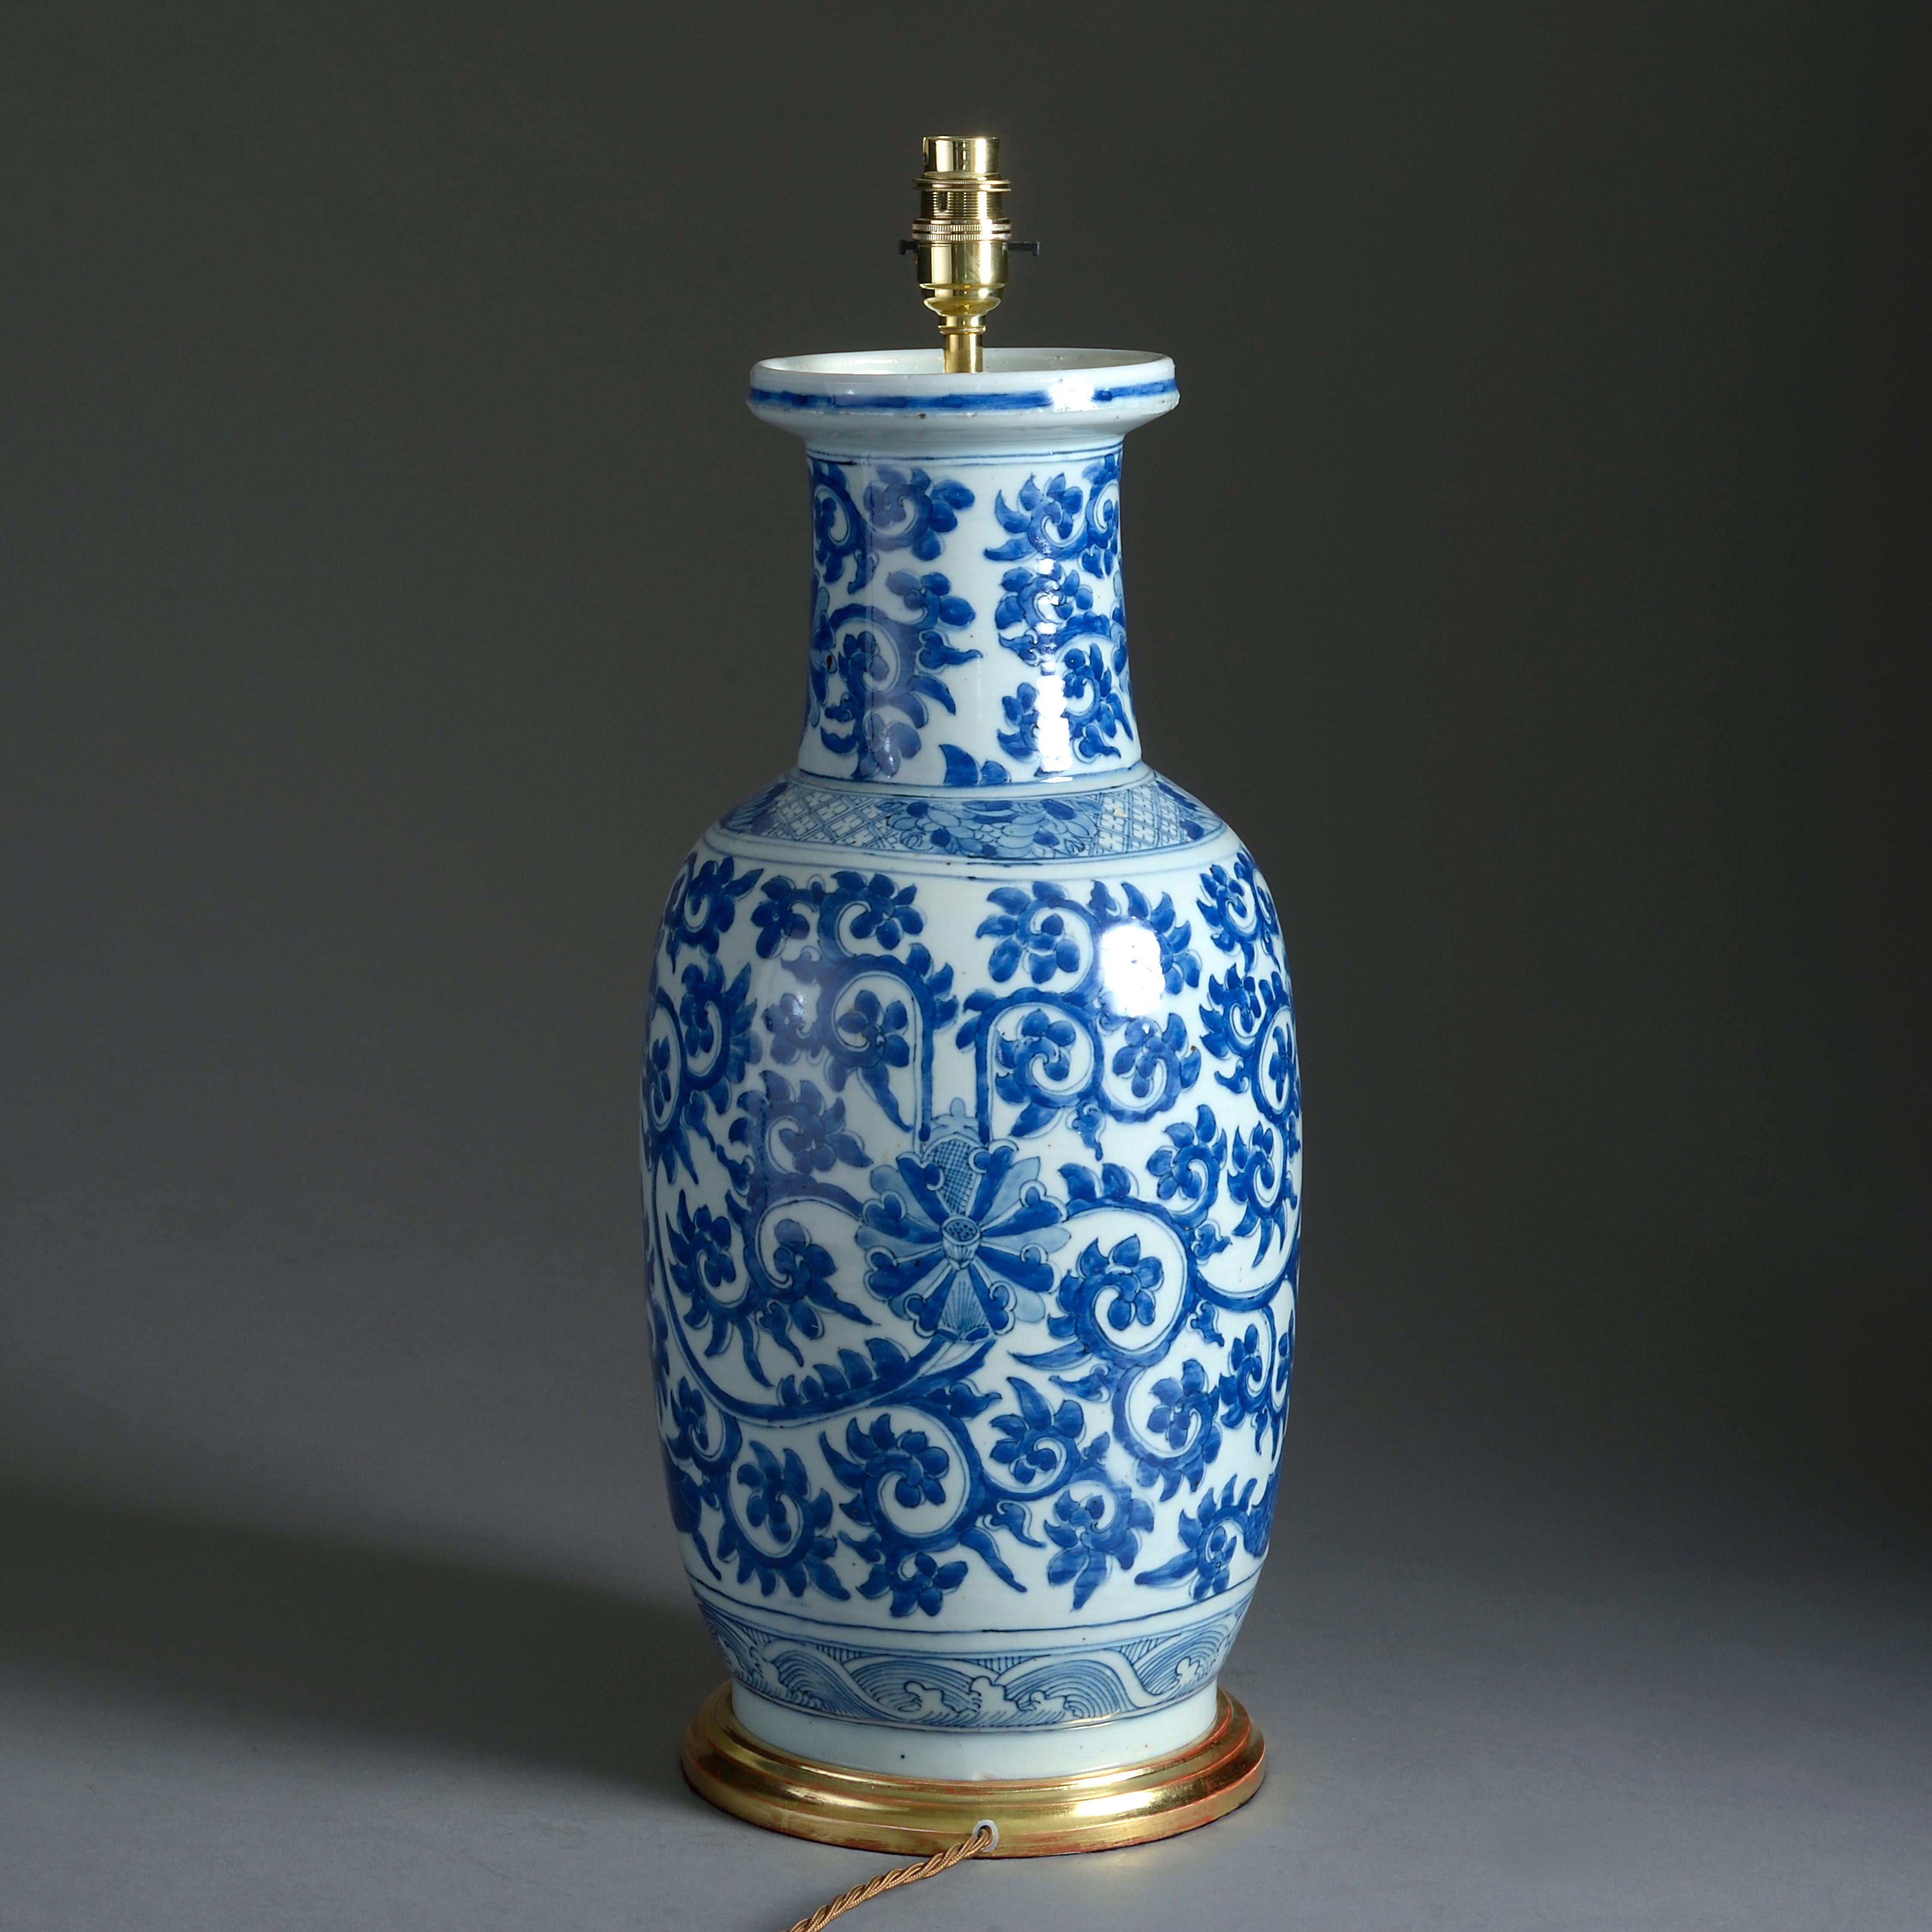 Chinese Export 18th Century Blue and White Porcelain Vase Lamp